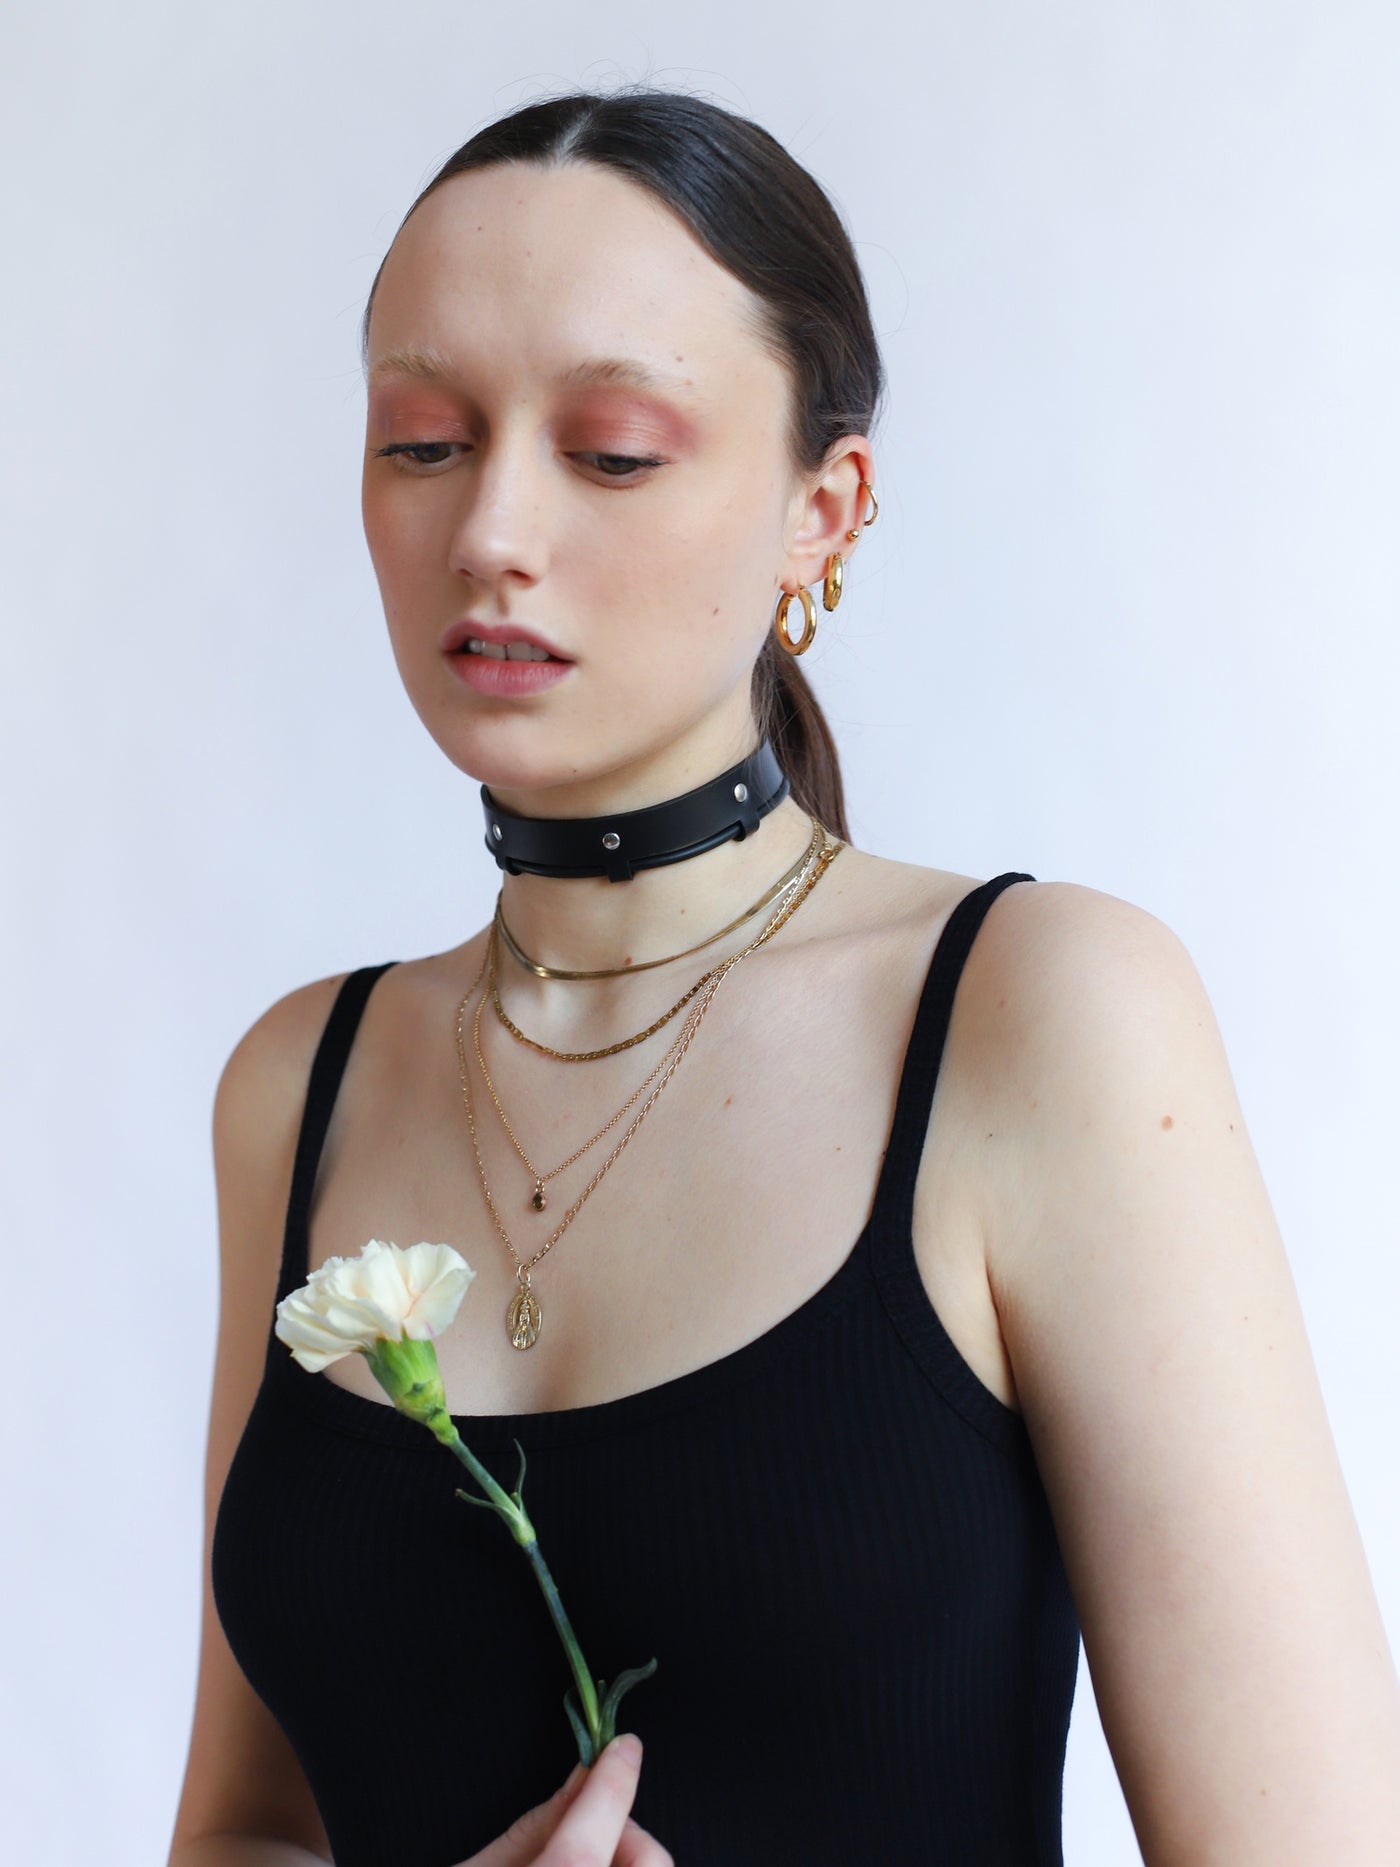 Tessa featuring the Cherry choker holding a flower by Baby turns Blue Paris